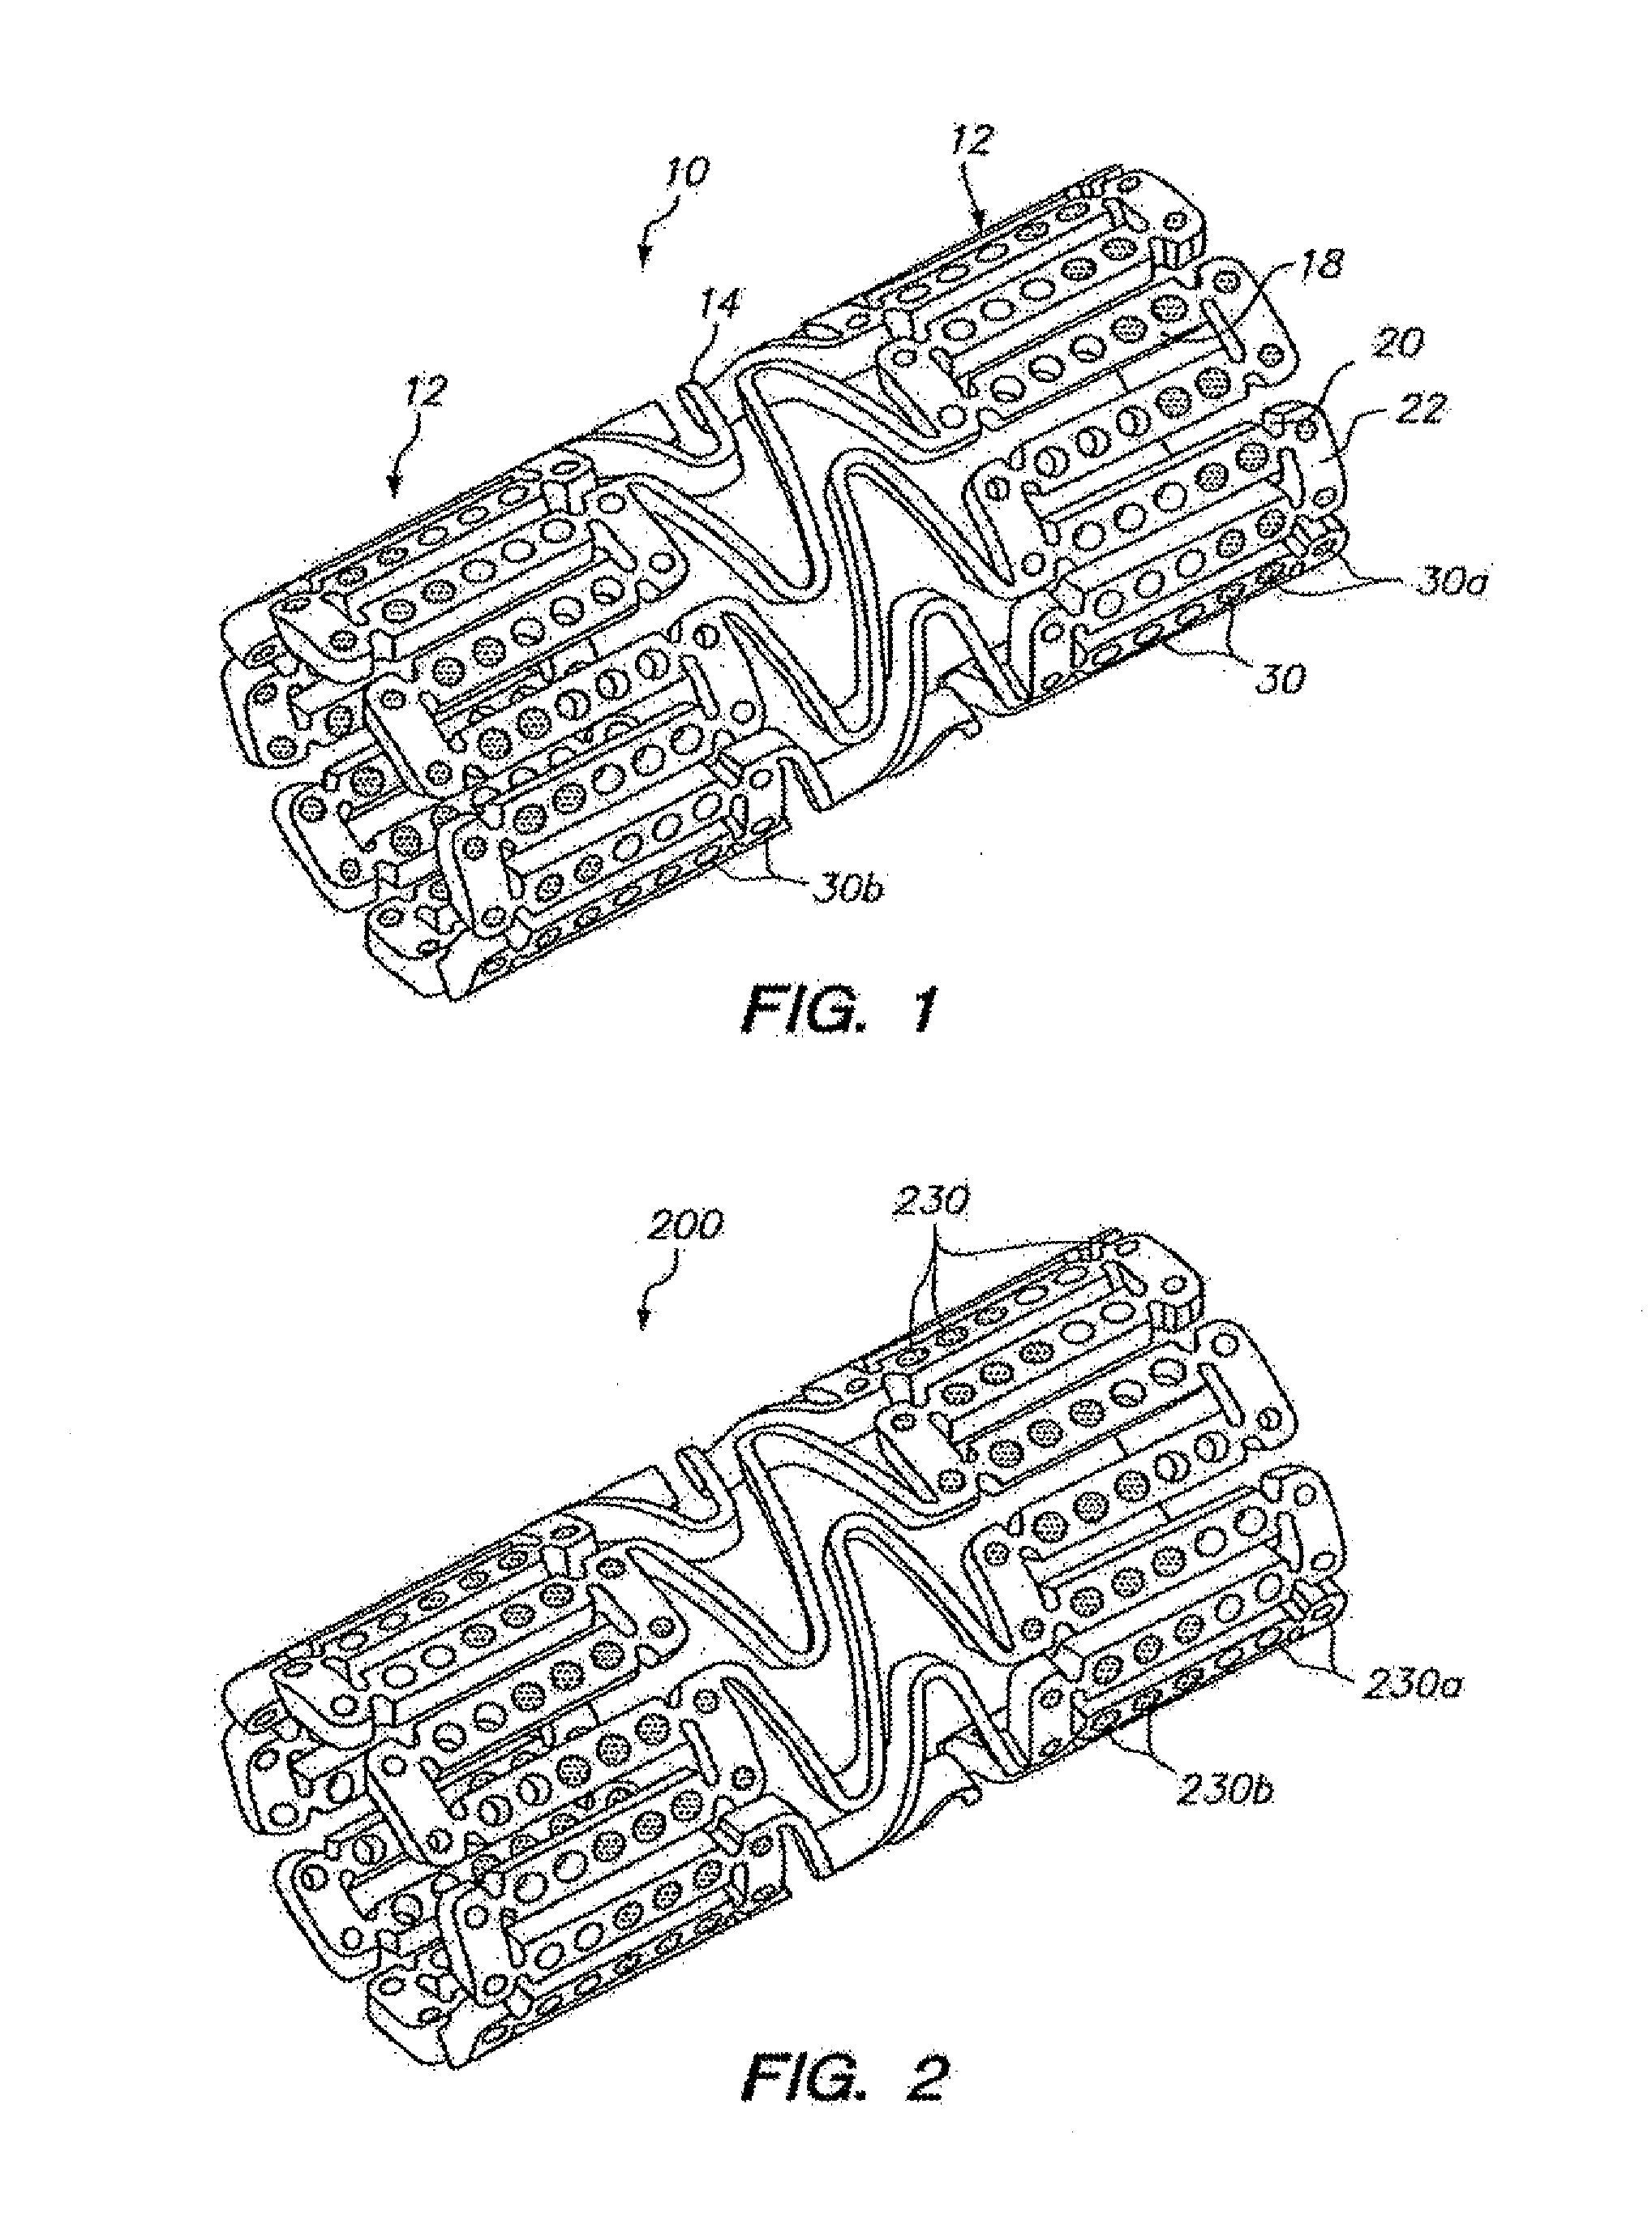 Adhesion promoting temporary mask for coated surfaces